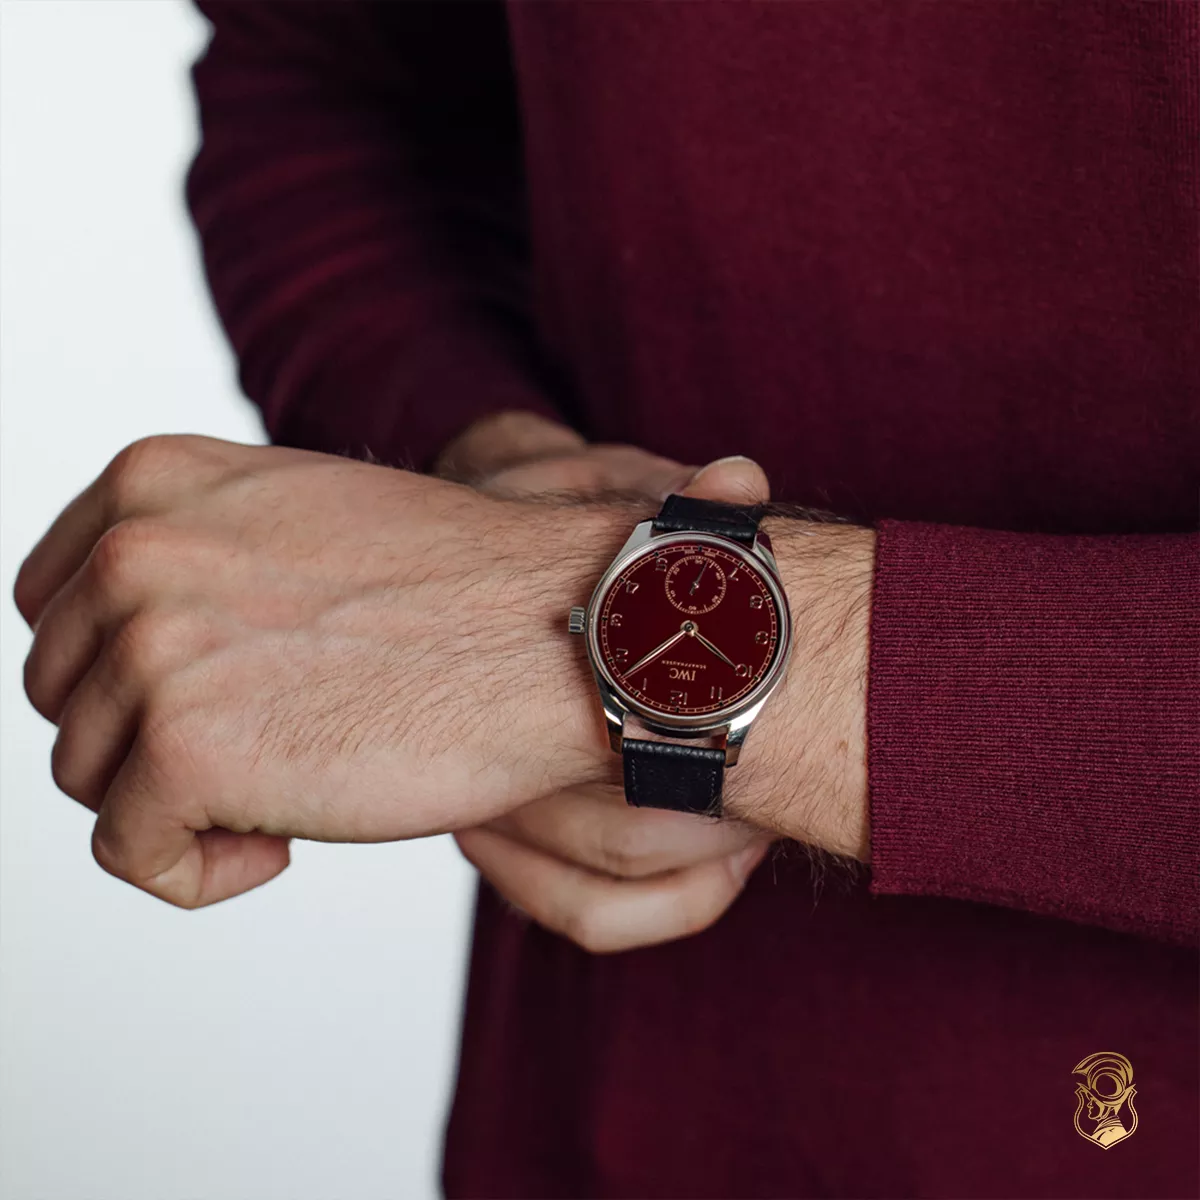 IWC Portugieser Limited Chinese New Year 40mm